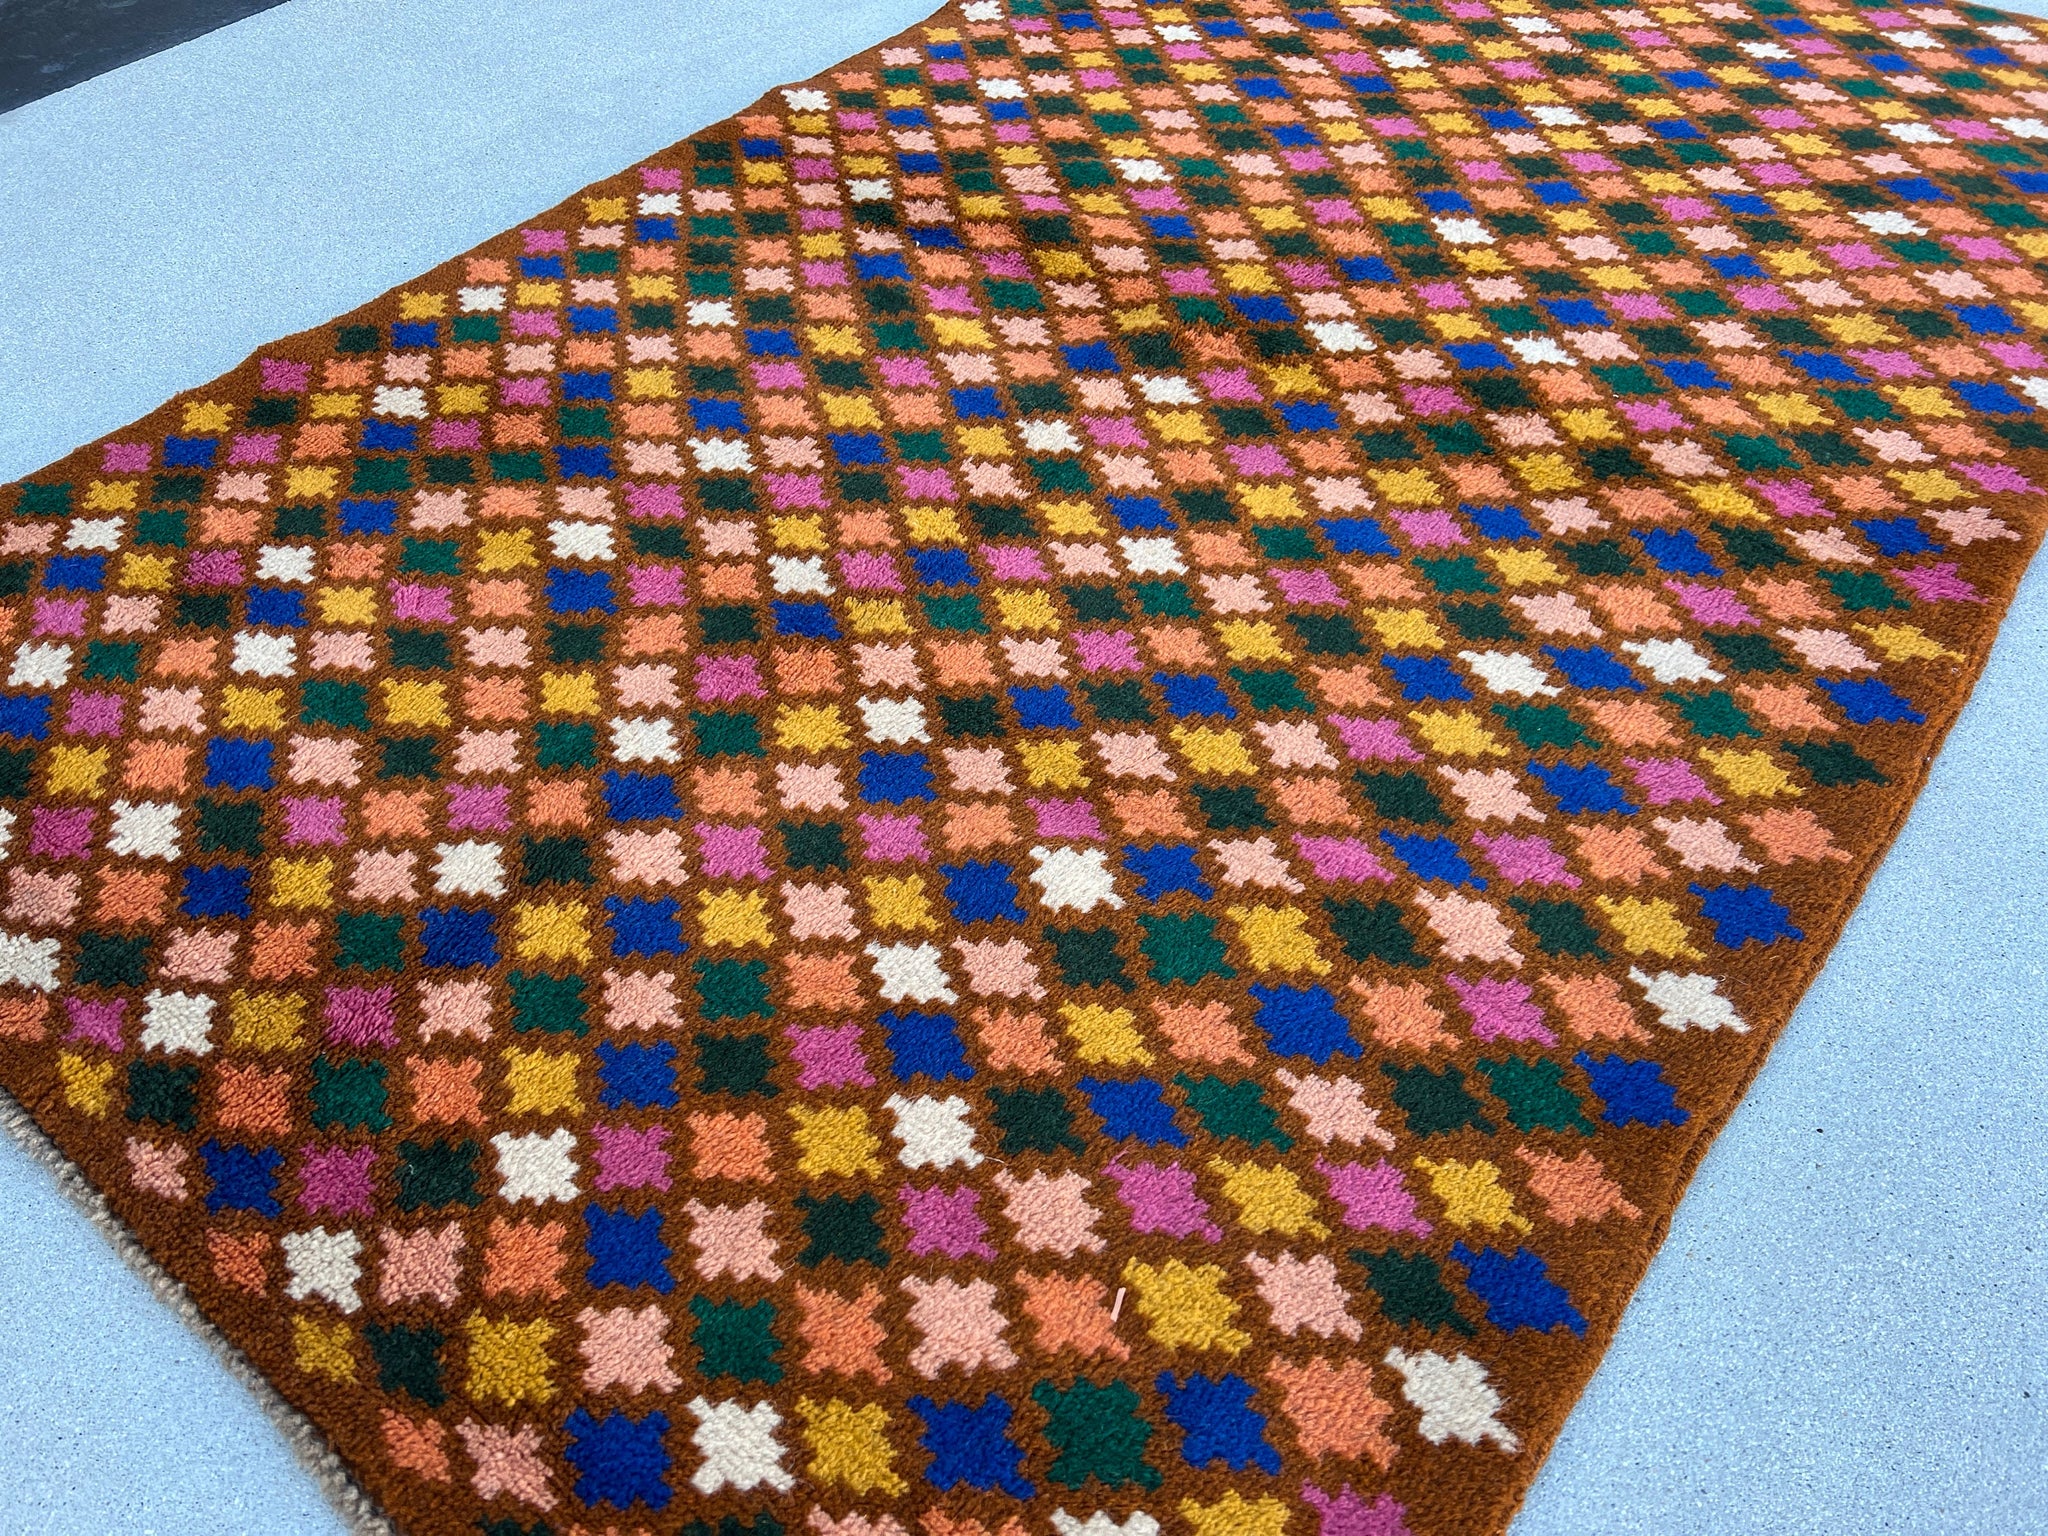 4x6 (120x185) Handmade Vintage Baluch Afghan Rug | Copper Brown Ivory Blue Pine Fern Green Rose Blush Pink | Geometric Hand Knotted Wool